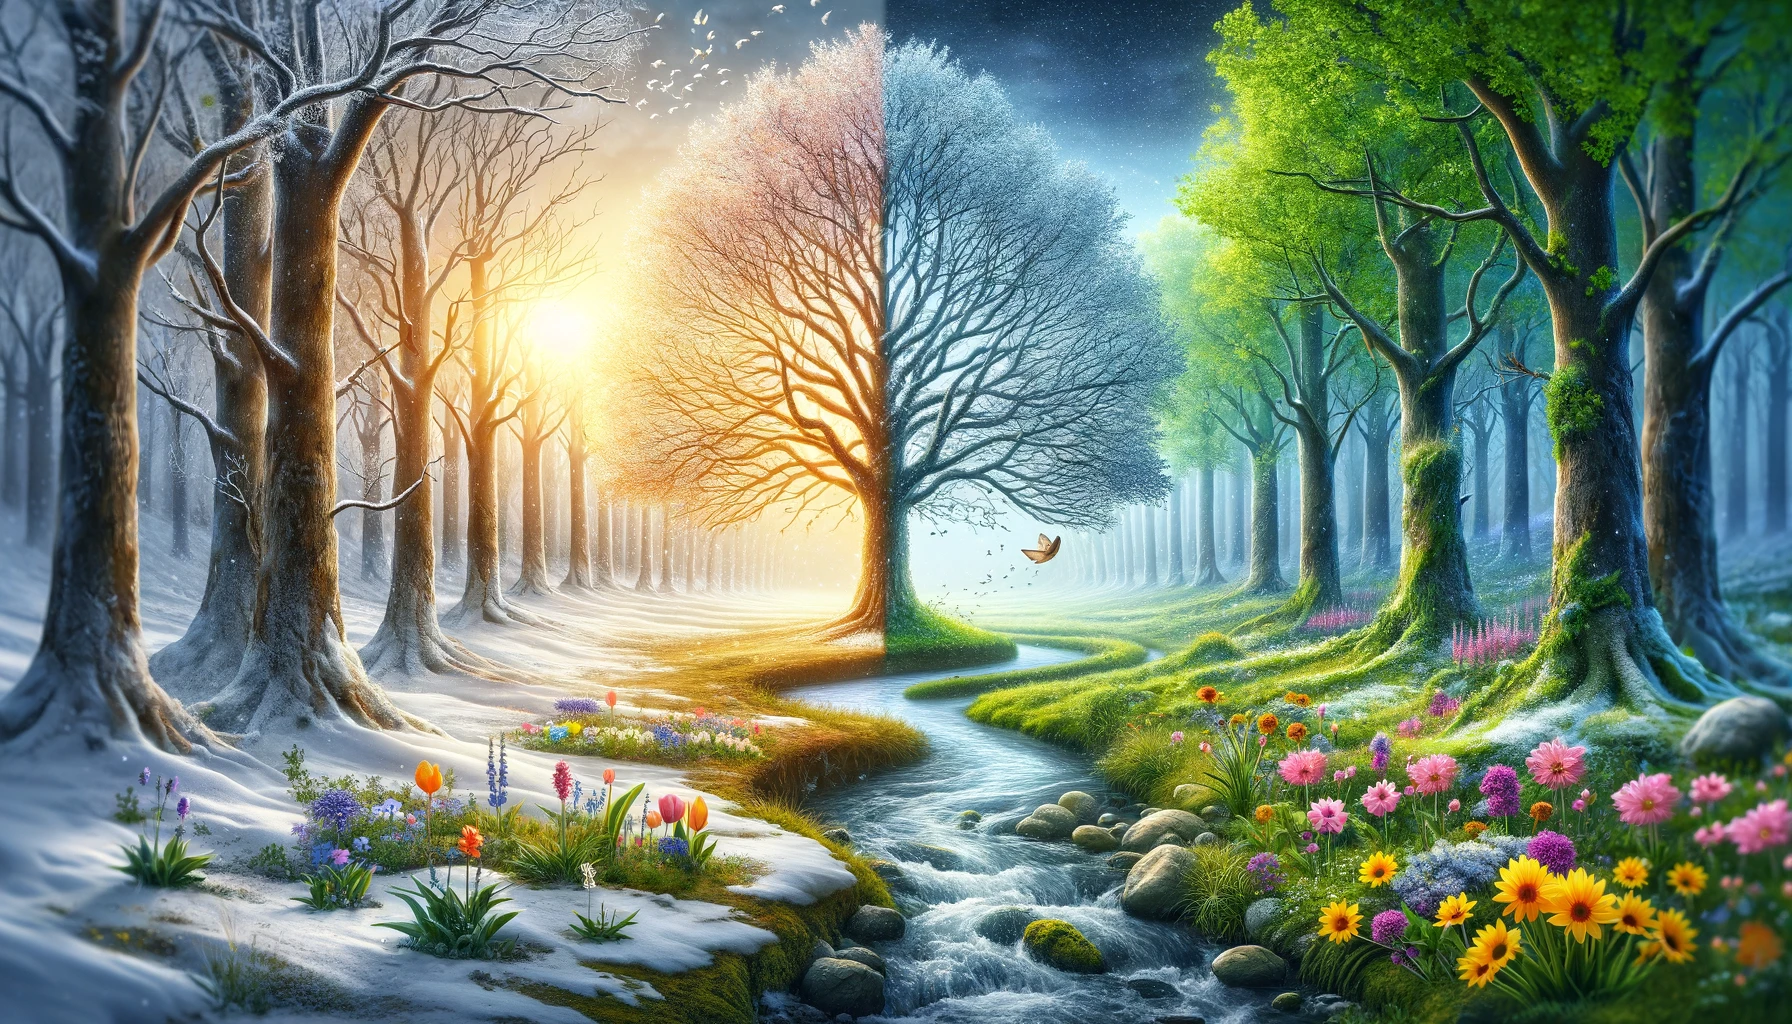 Image that represents the transition from tree dormancy in winter to the vibrant awakening of spring, capturing the contrast between the two seasons. It visually illustrates the concept of dormancy and renewal in nature